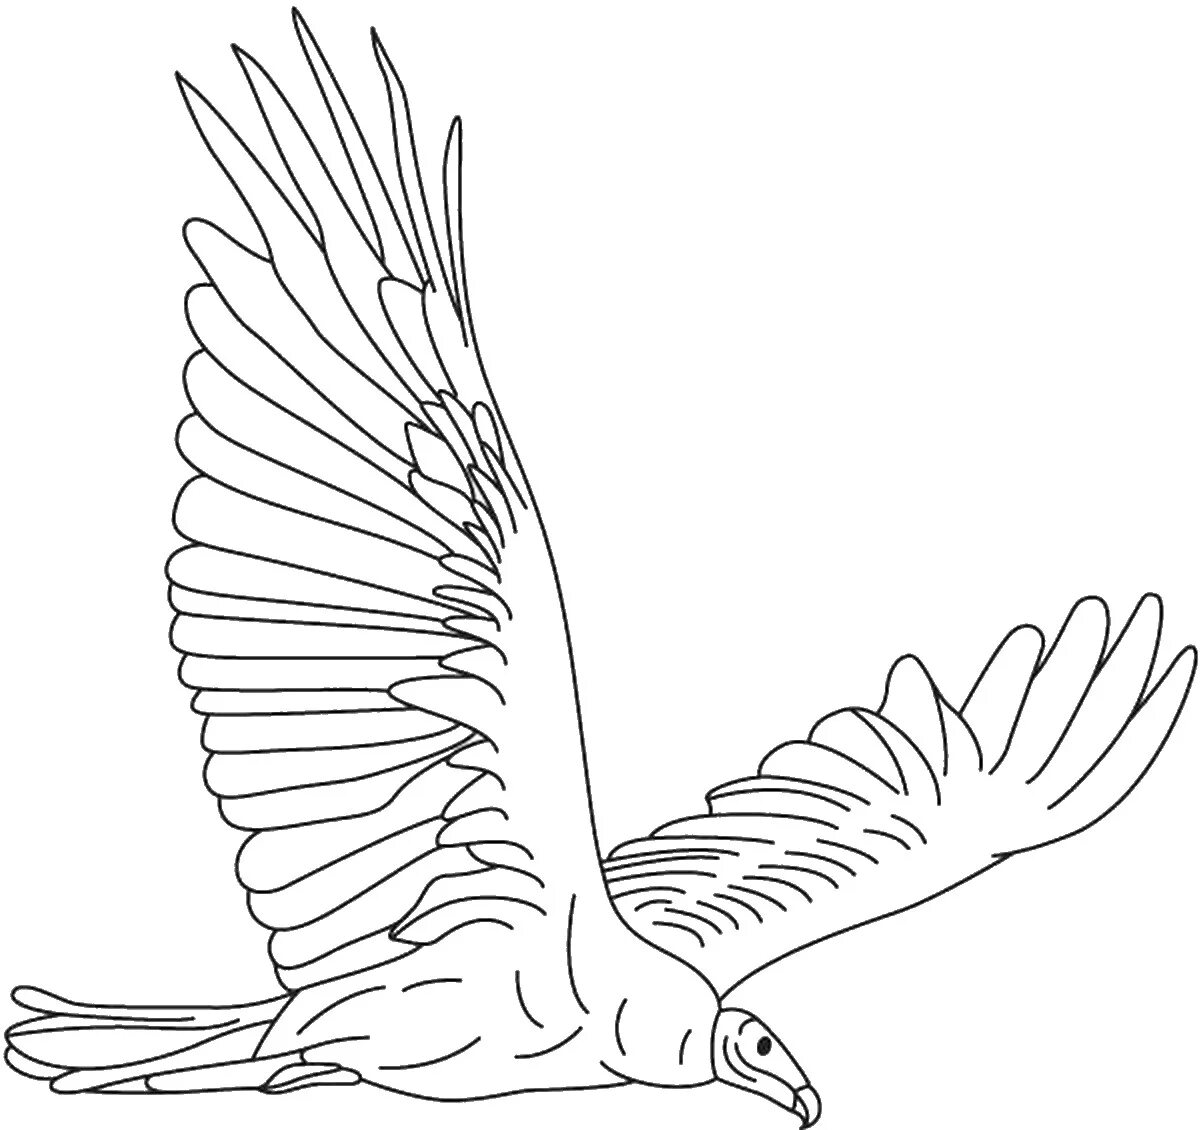 Coloring page graceful vulture